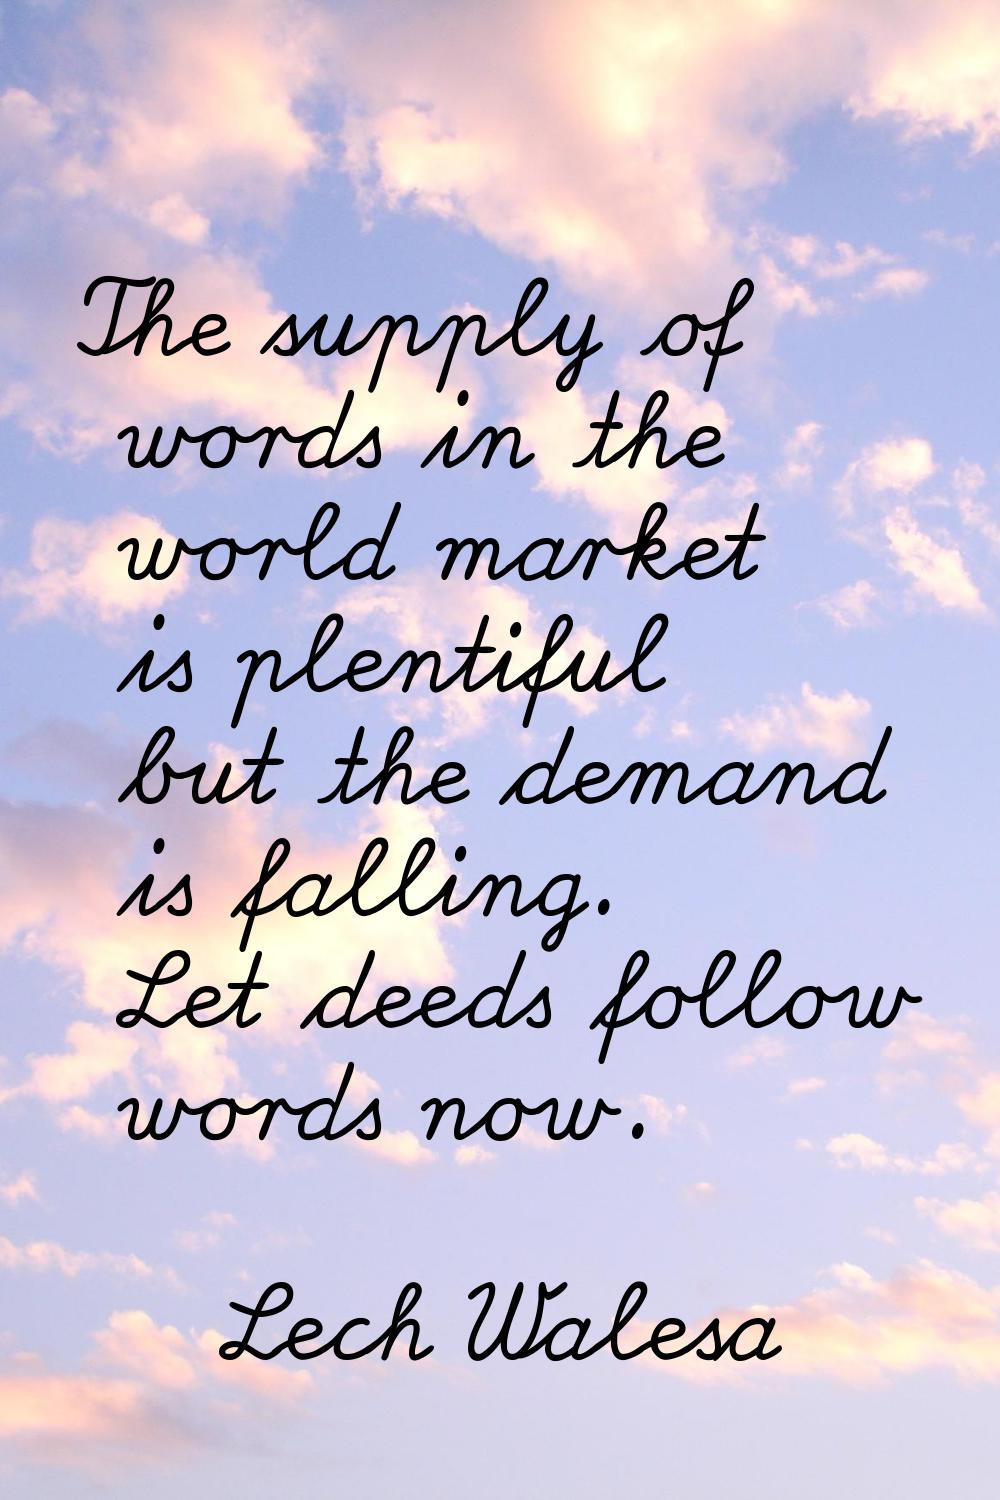 The supply of words in the world market is plentiful but the demand is falling. Let deeds follow wo